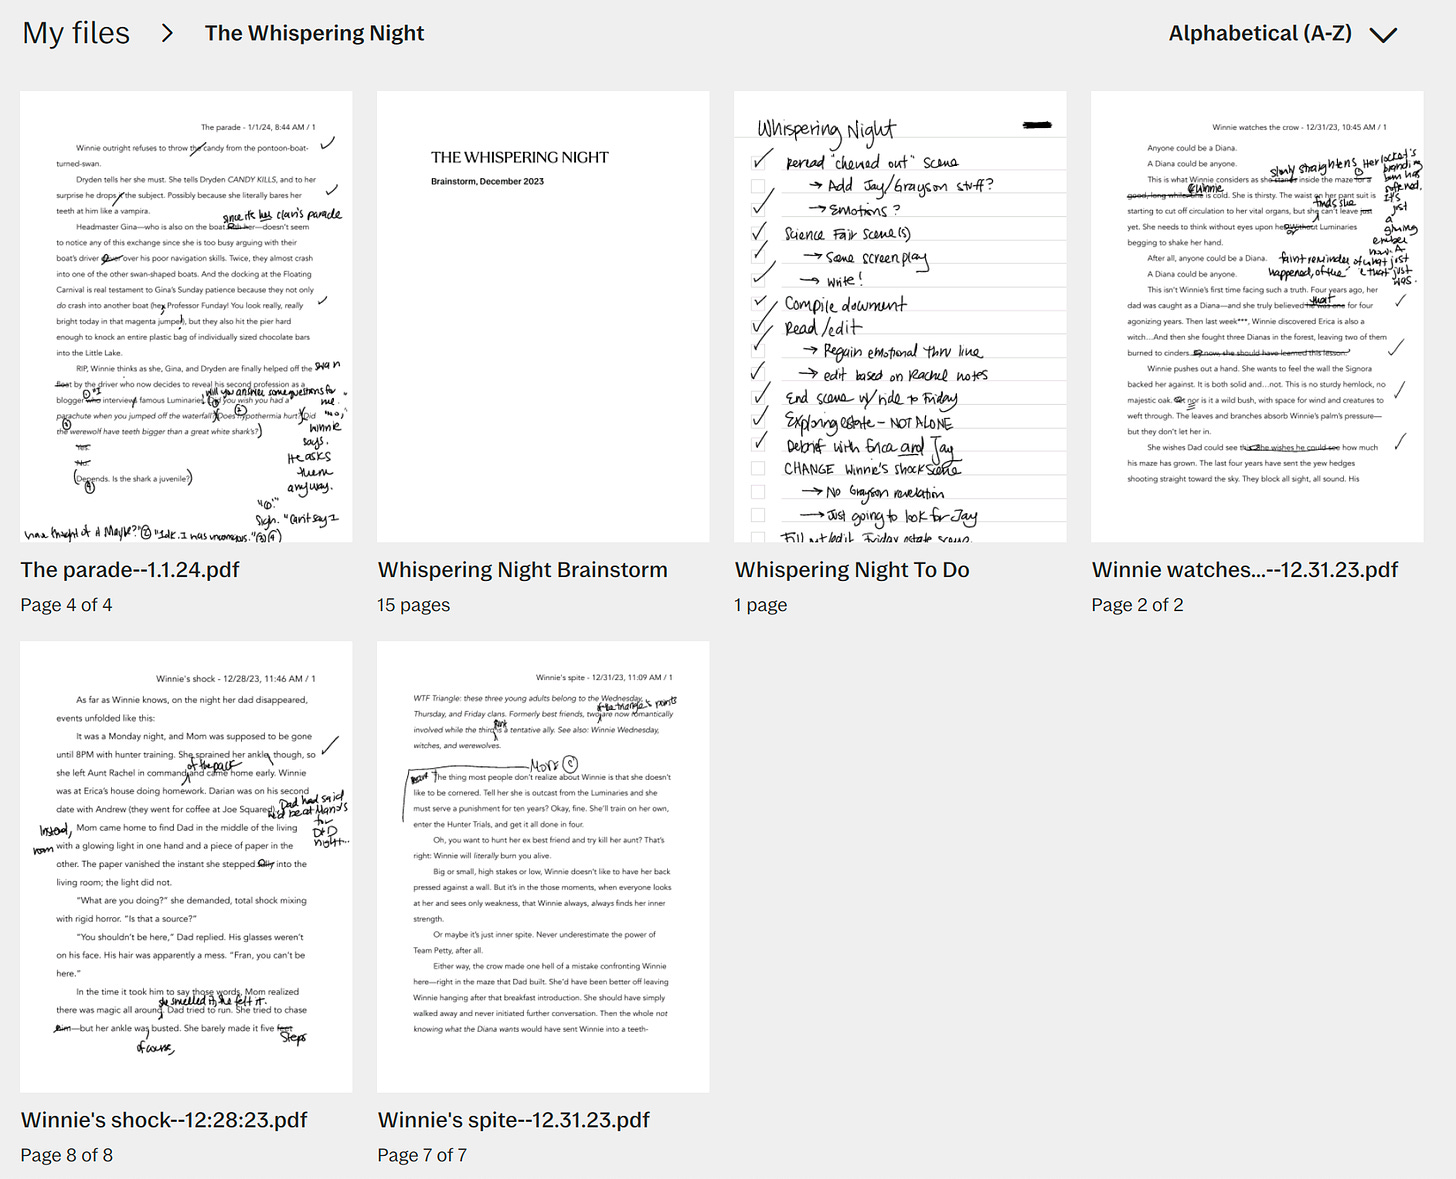 A screenshot of the reMarkable app, which also looks like the device itself. You can see different thumbnails of paper, each labeled by scene title or brainstorming page, such as "Whispering Night brainstorm" or "the parade--1.1.24"